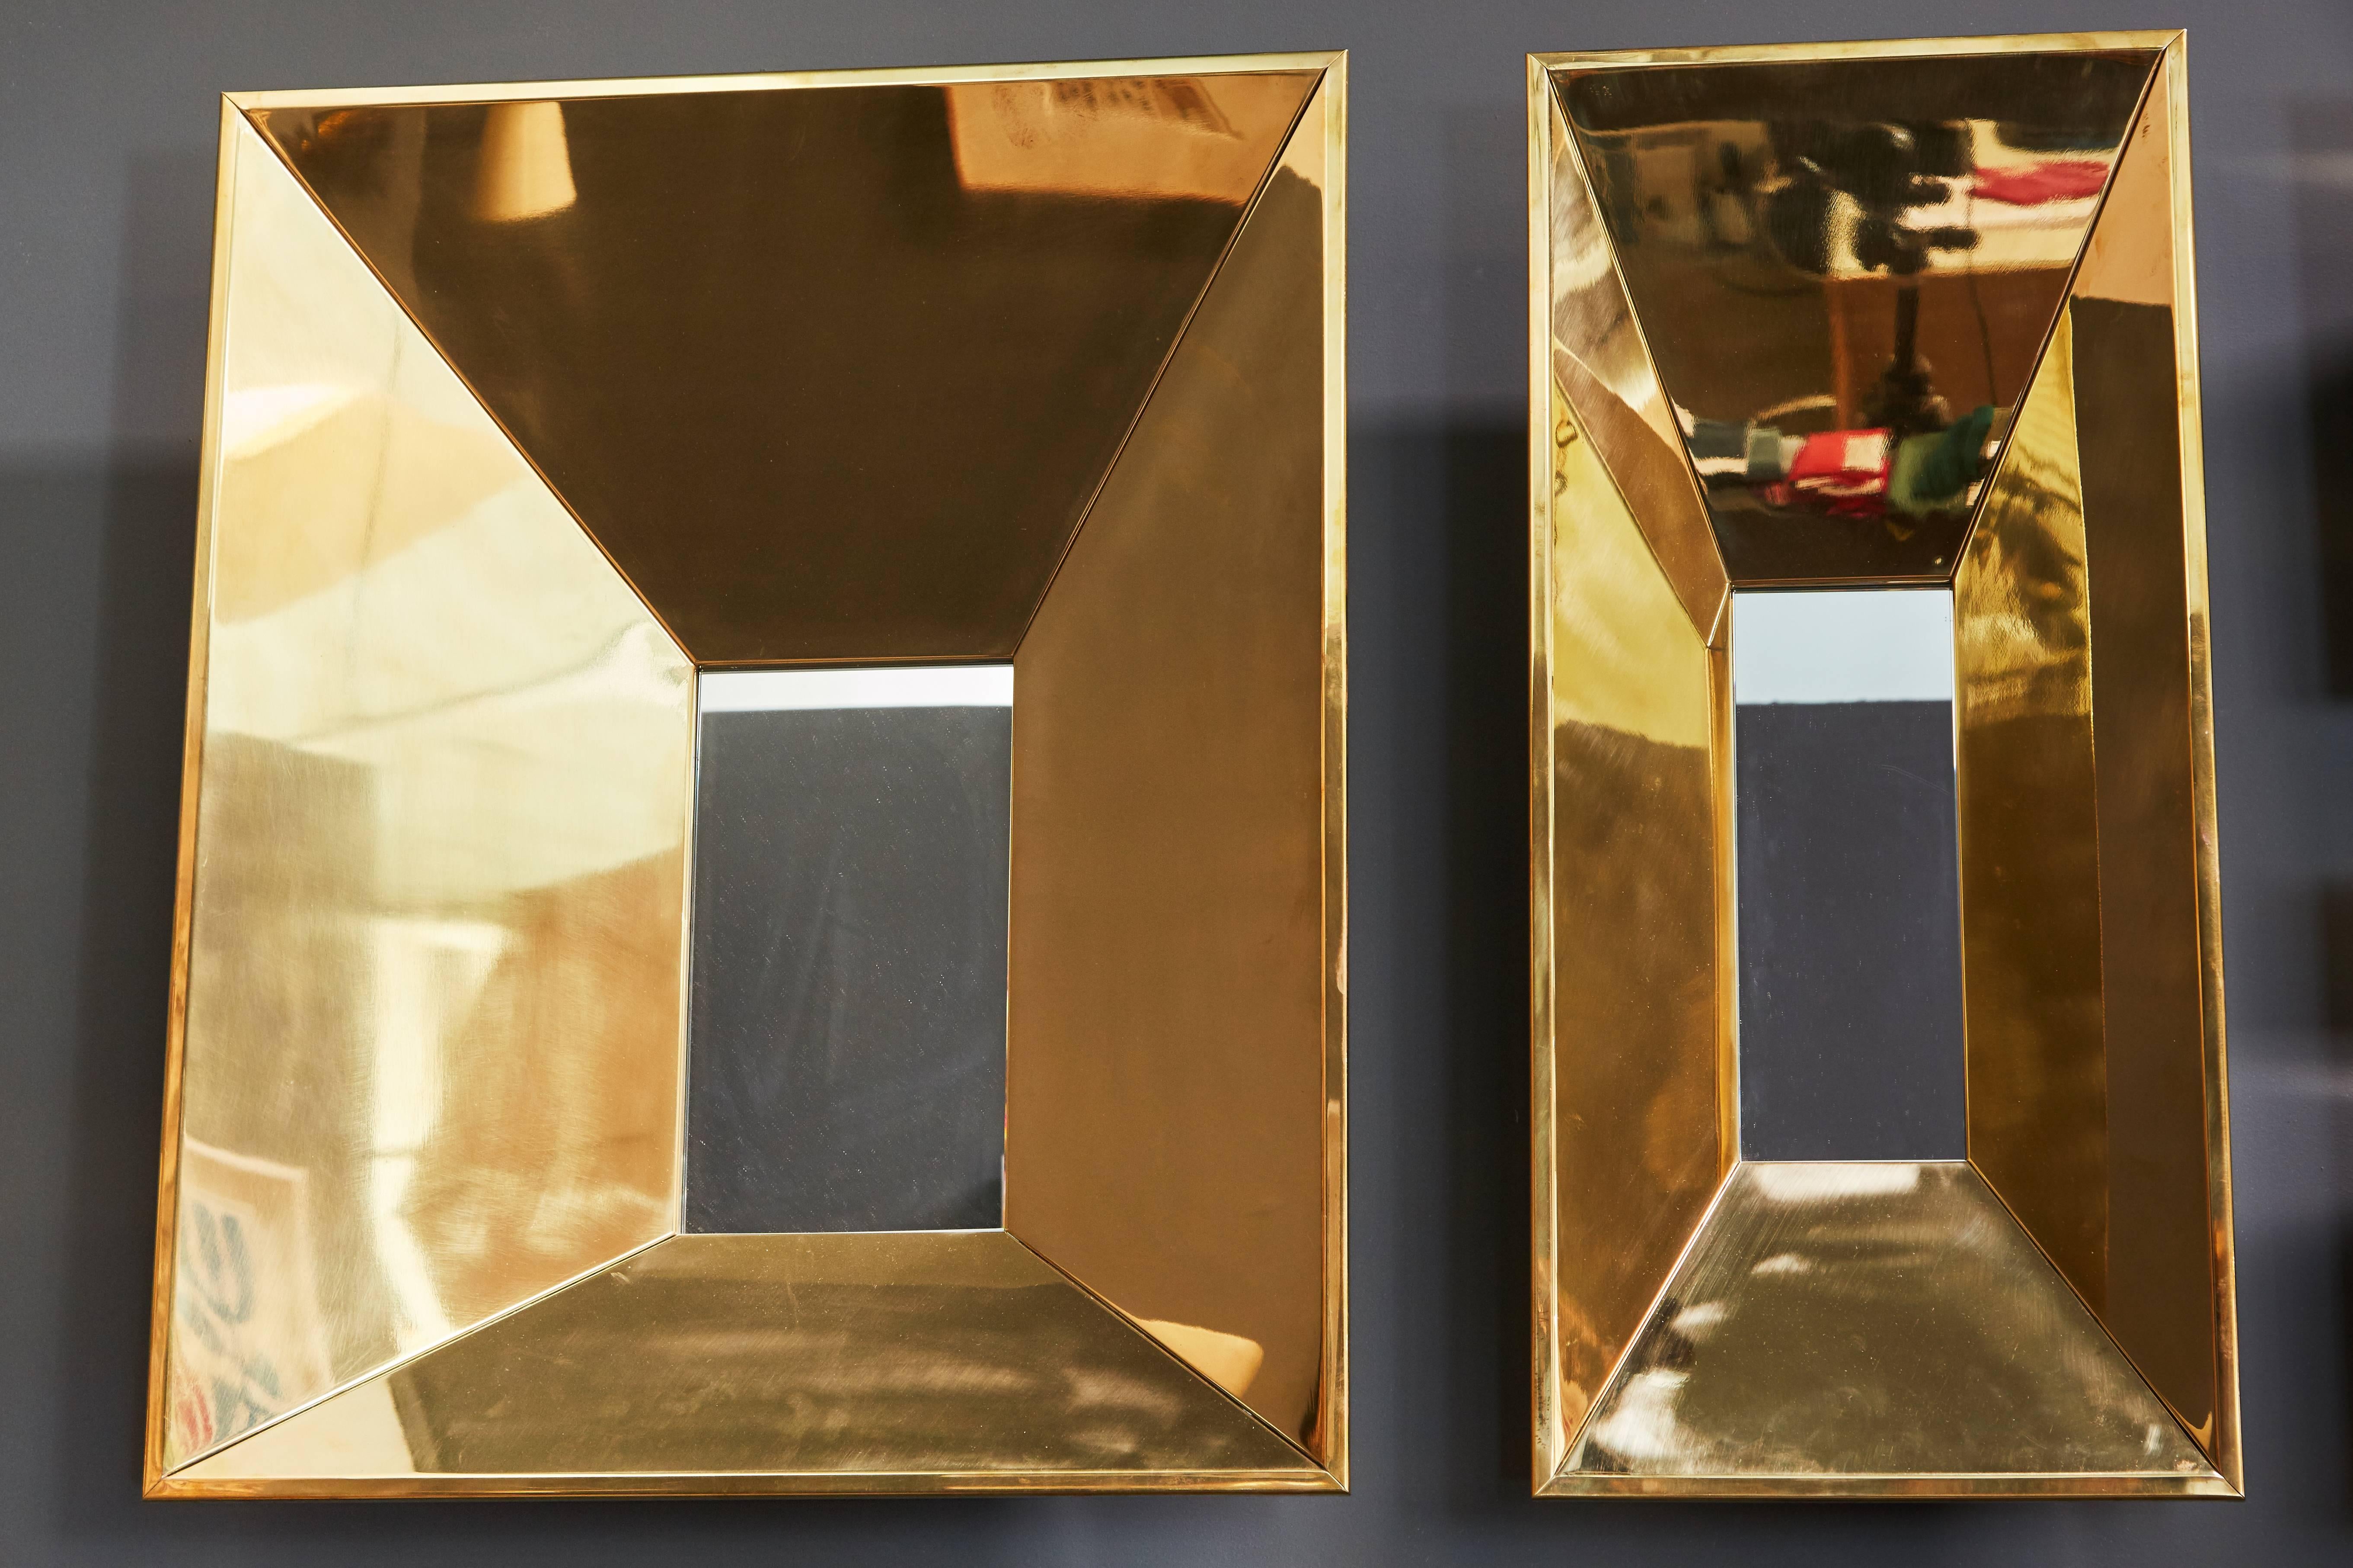 A stunning set of six canted framed mirrors with highly polished brass.

Provenance: The Dolce and Gabbana Emporium in Milan.

Dimensions in listing are for largest size. Please contact the showroom for additional information.